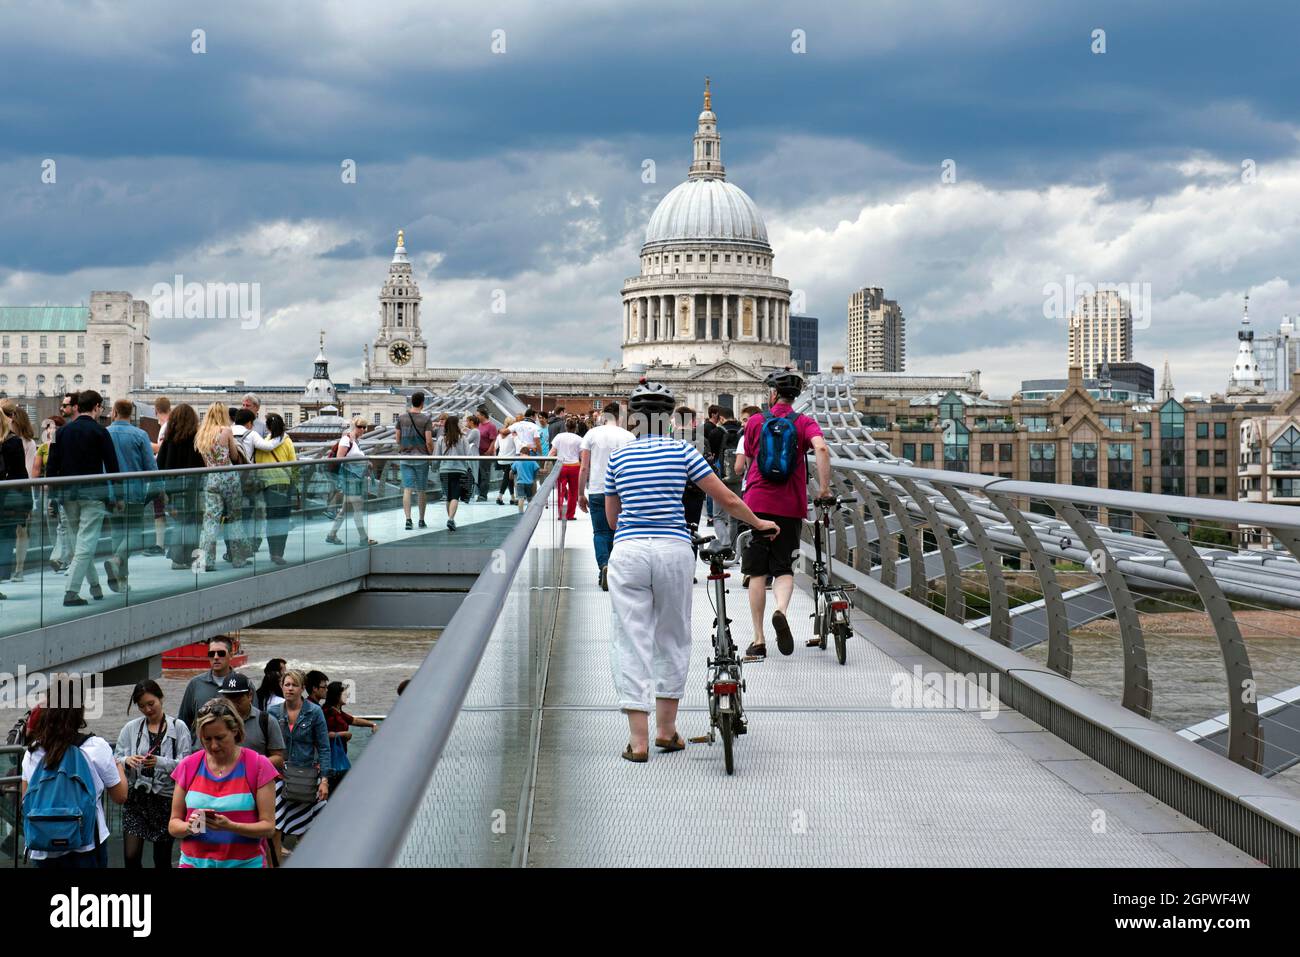 People crossing London Millennium Footbridge or Bridge across the Thames in summer some pushing bikes with St. Paul's Cathedral in the background. Stock Photo